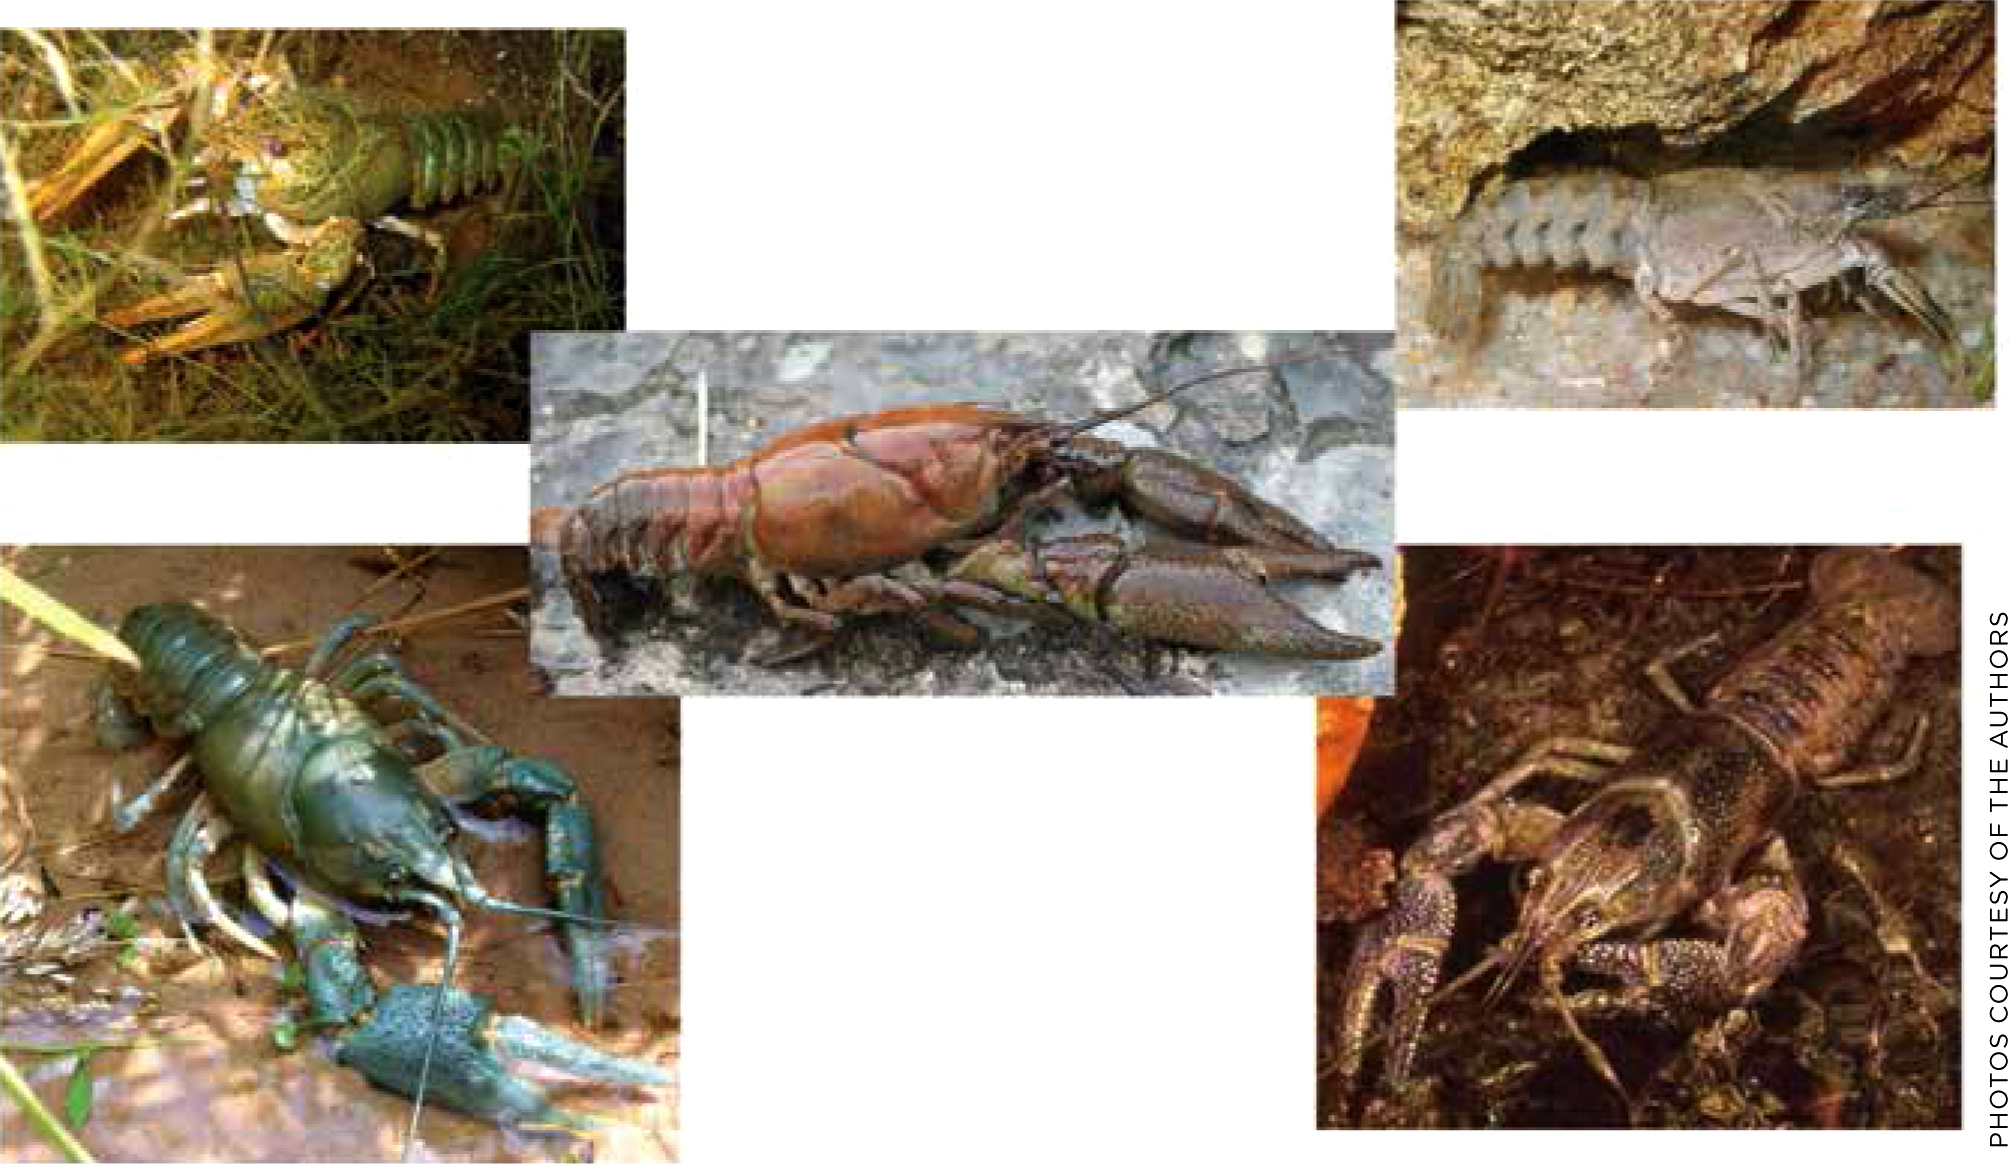 Images of a variety of crayfish species.